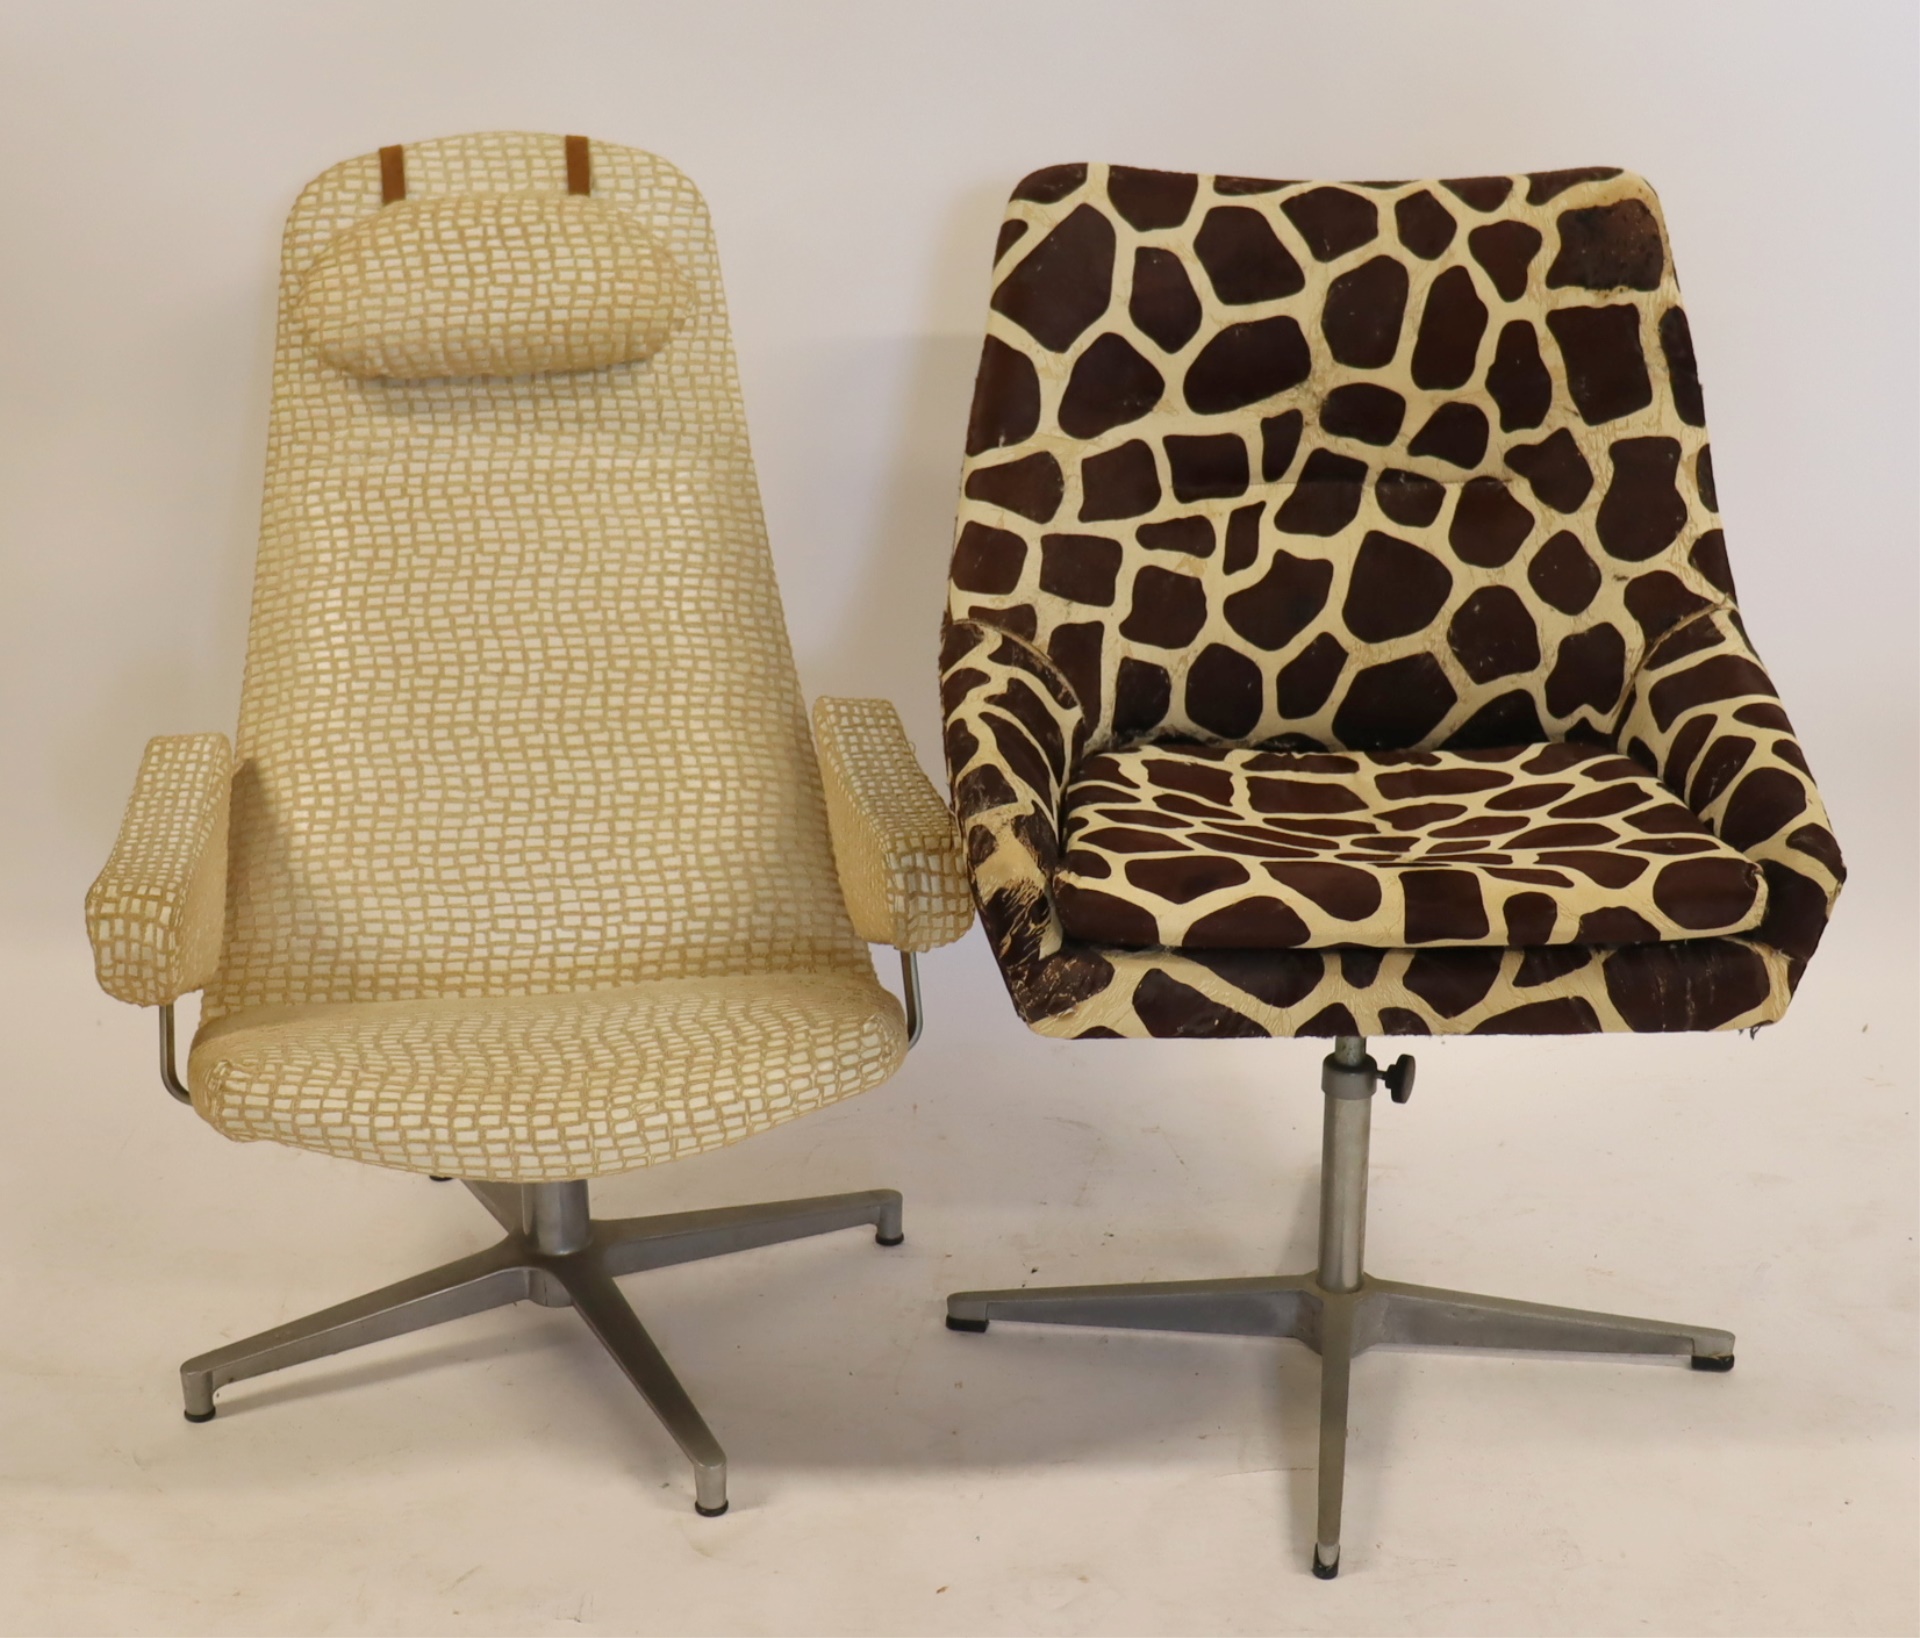 2 MIDCENTURY SWIVEL CHAIRS 1 with 3b77e9